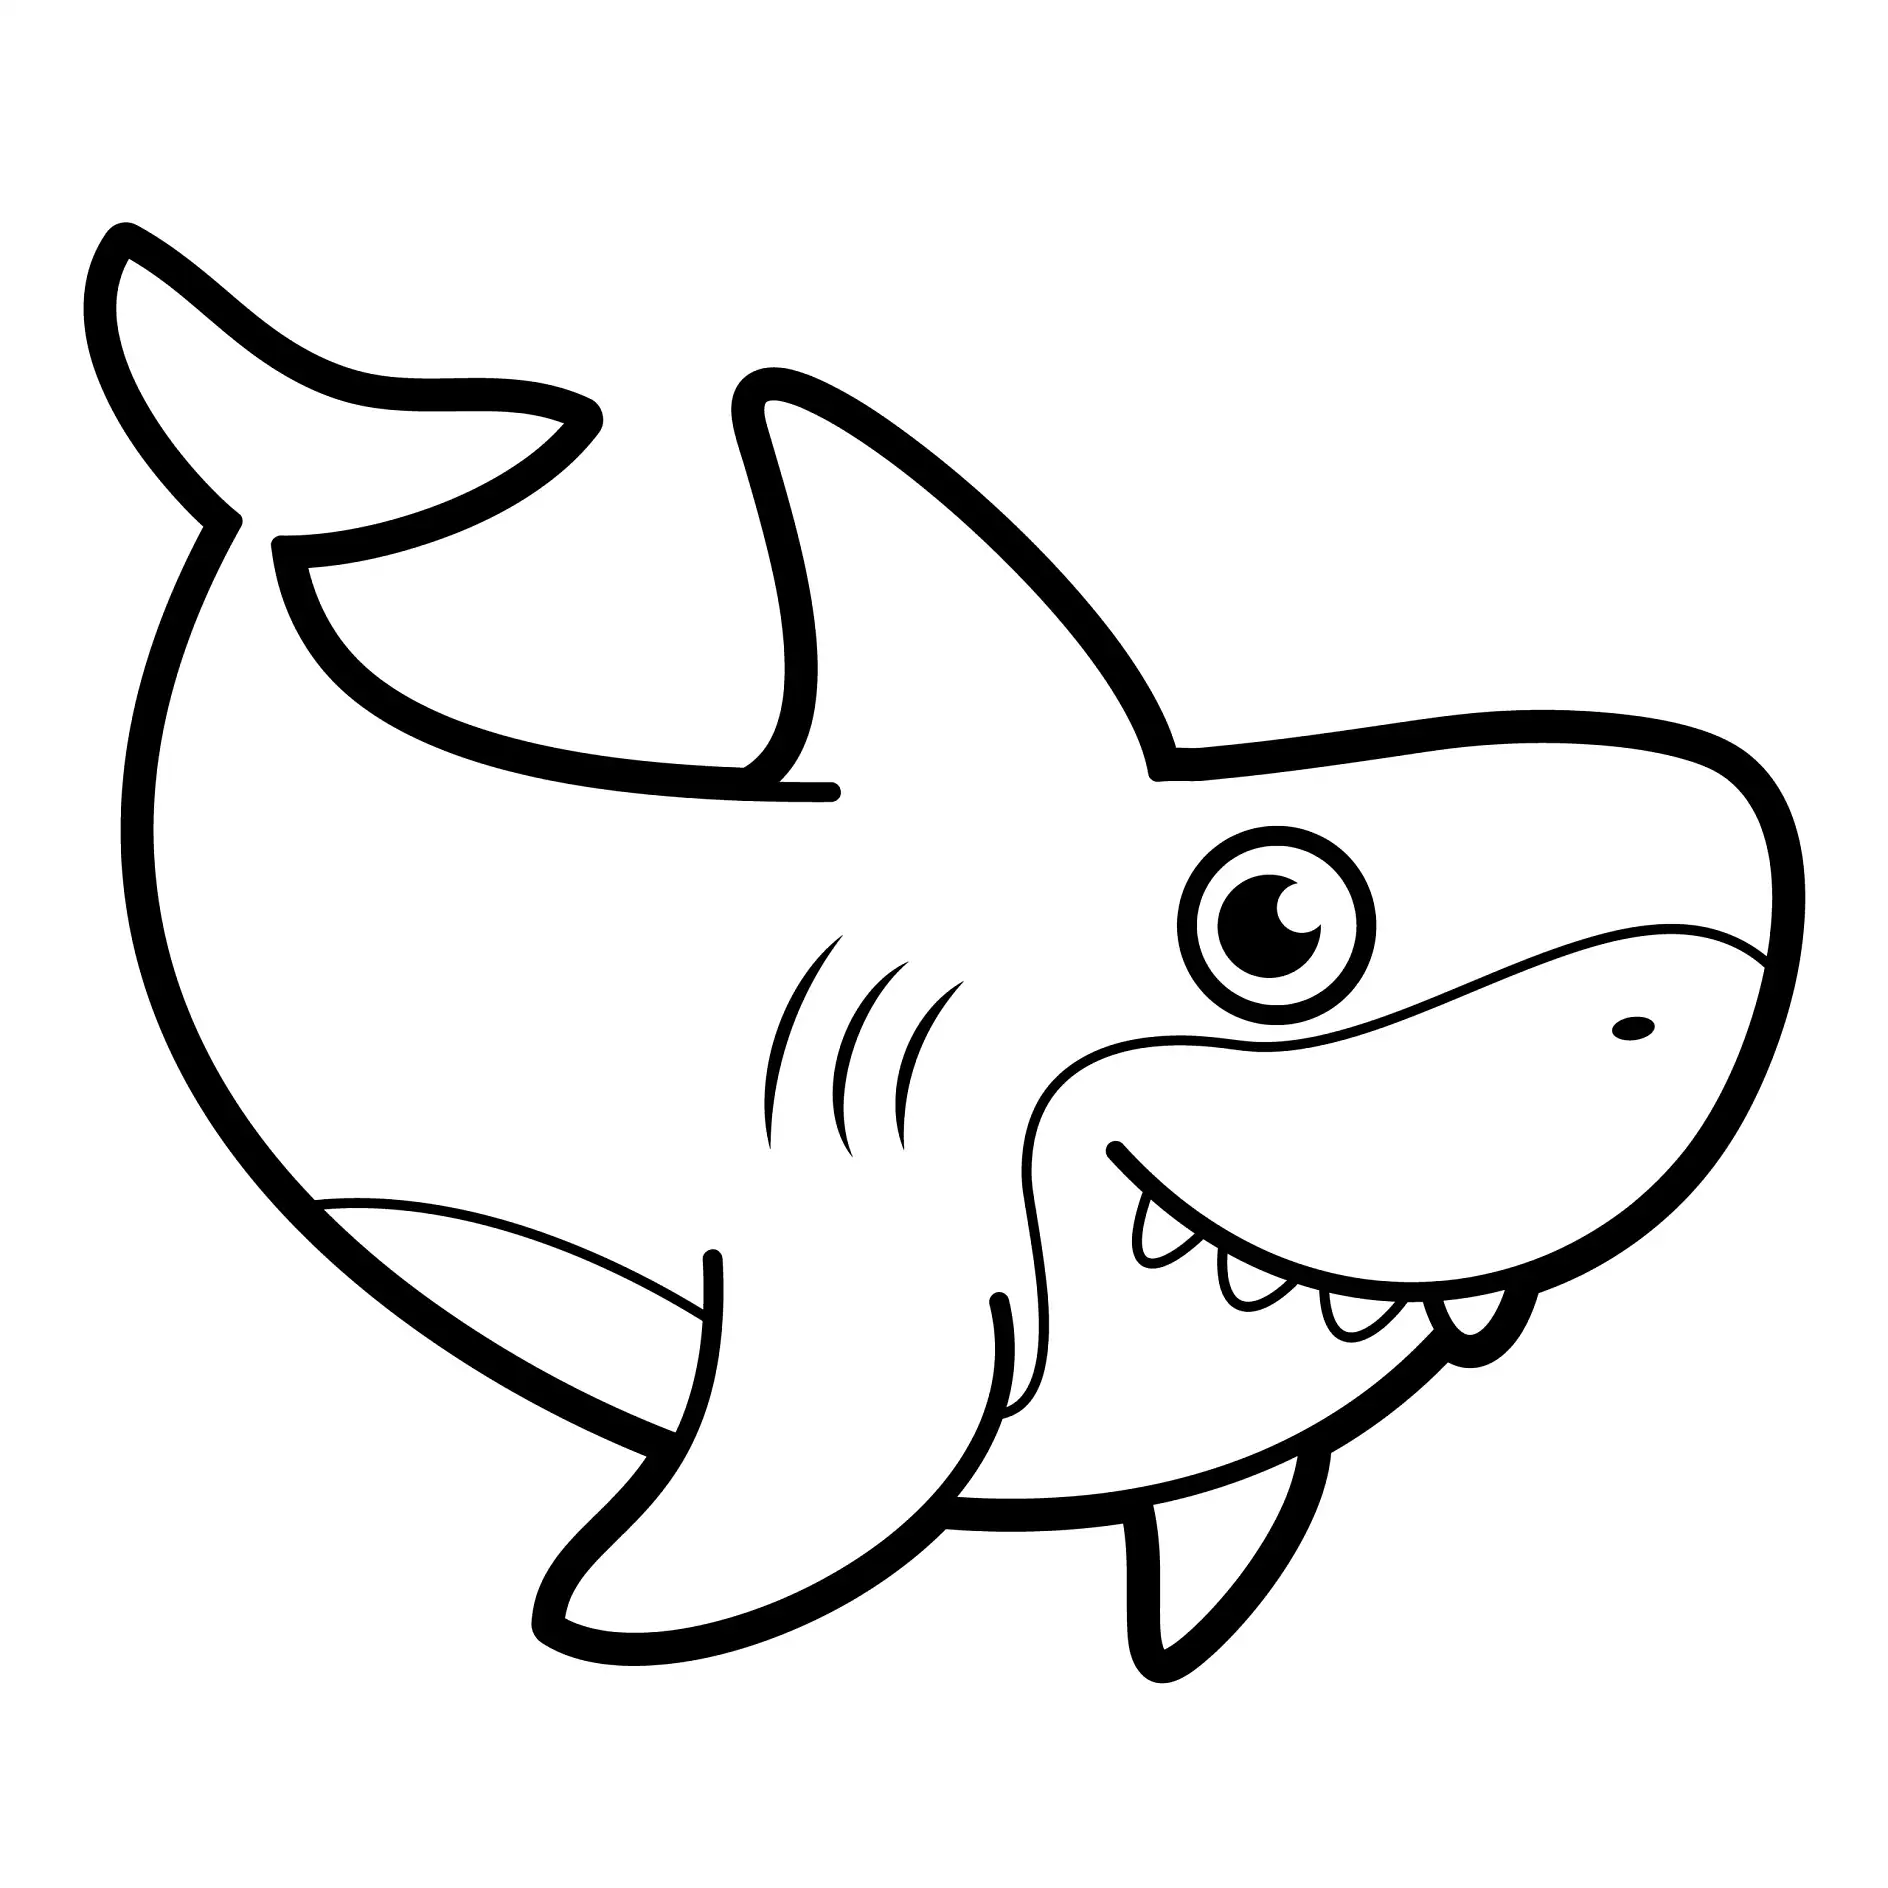 Coloring book or page for kids. shark black and white vector illustration